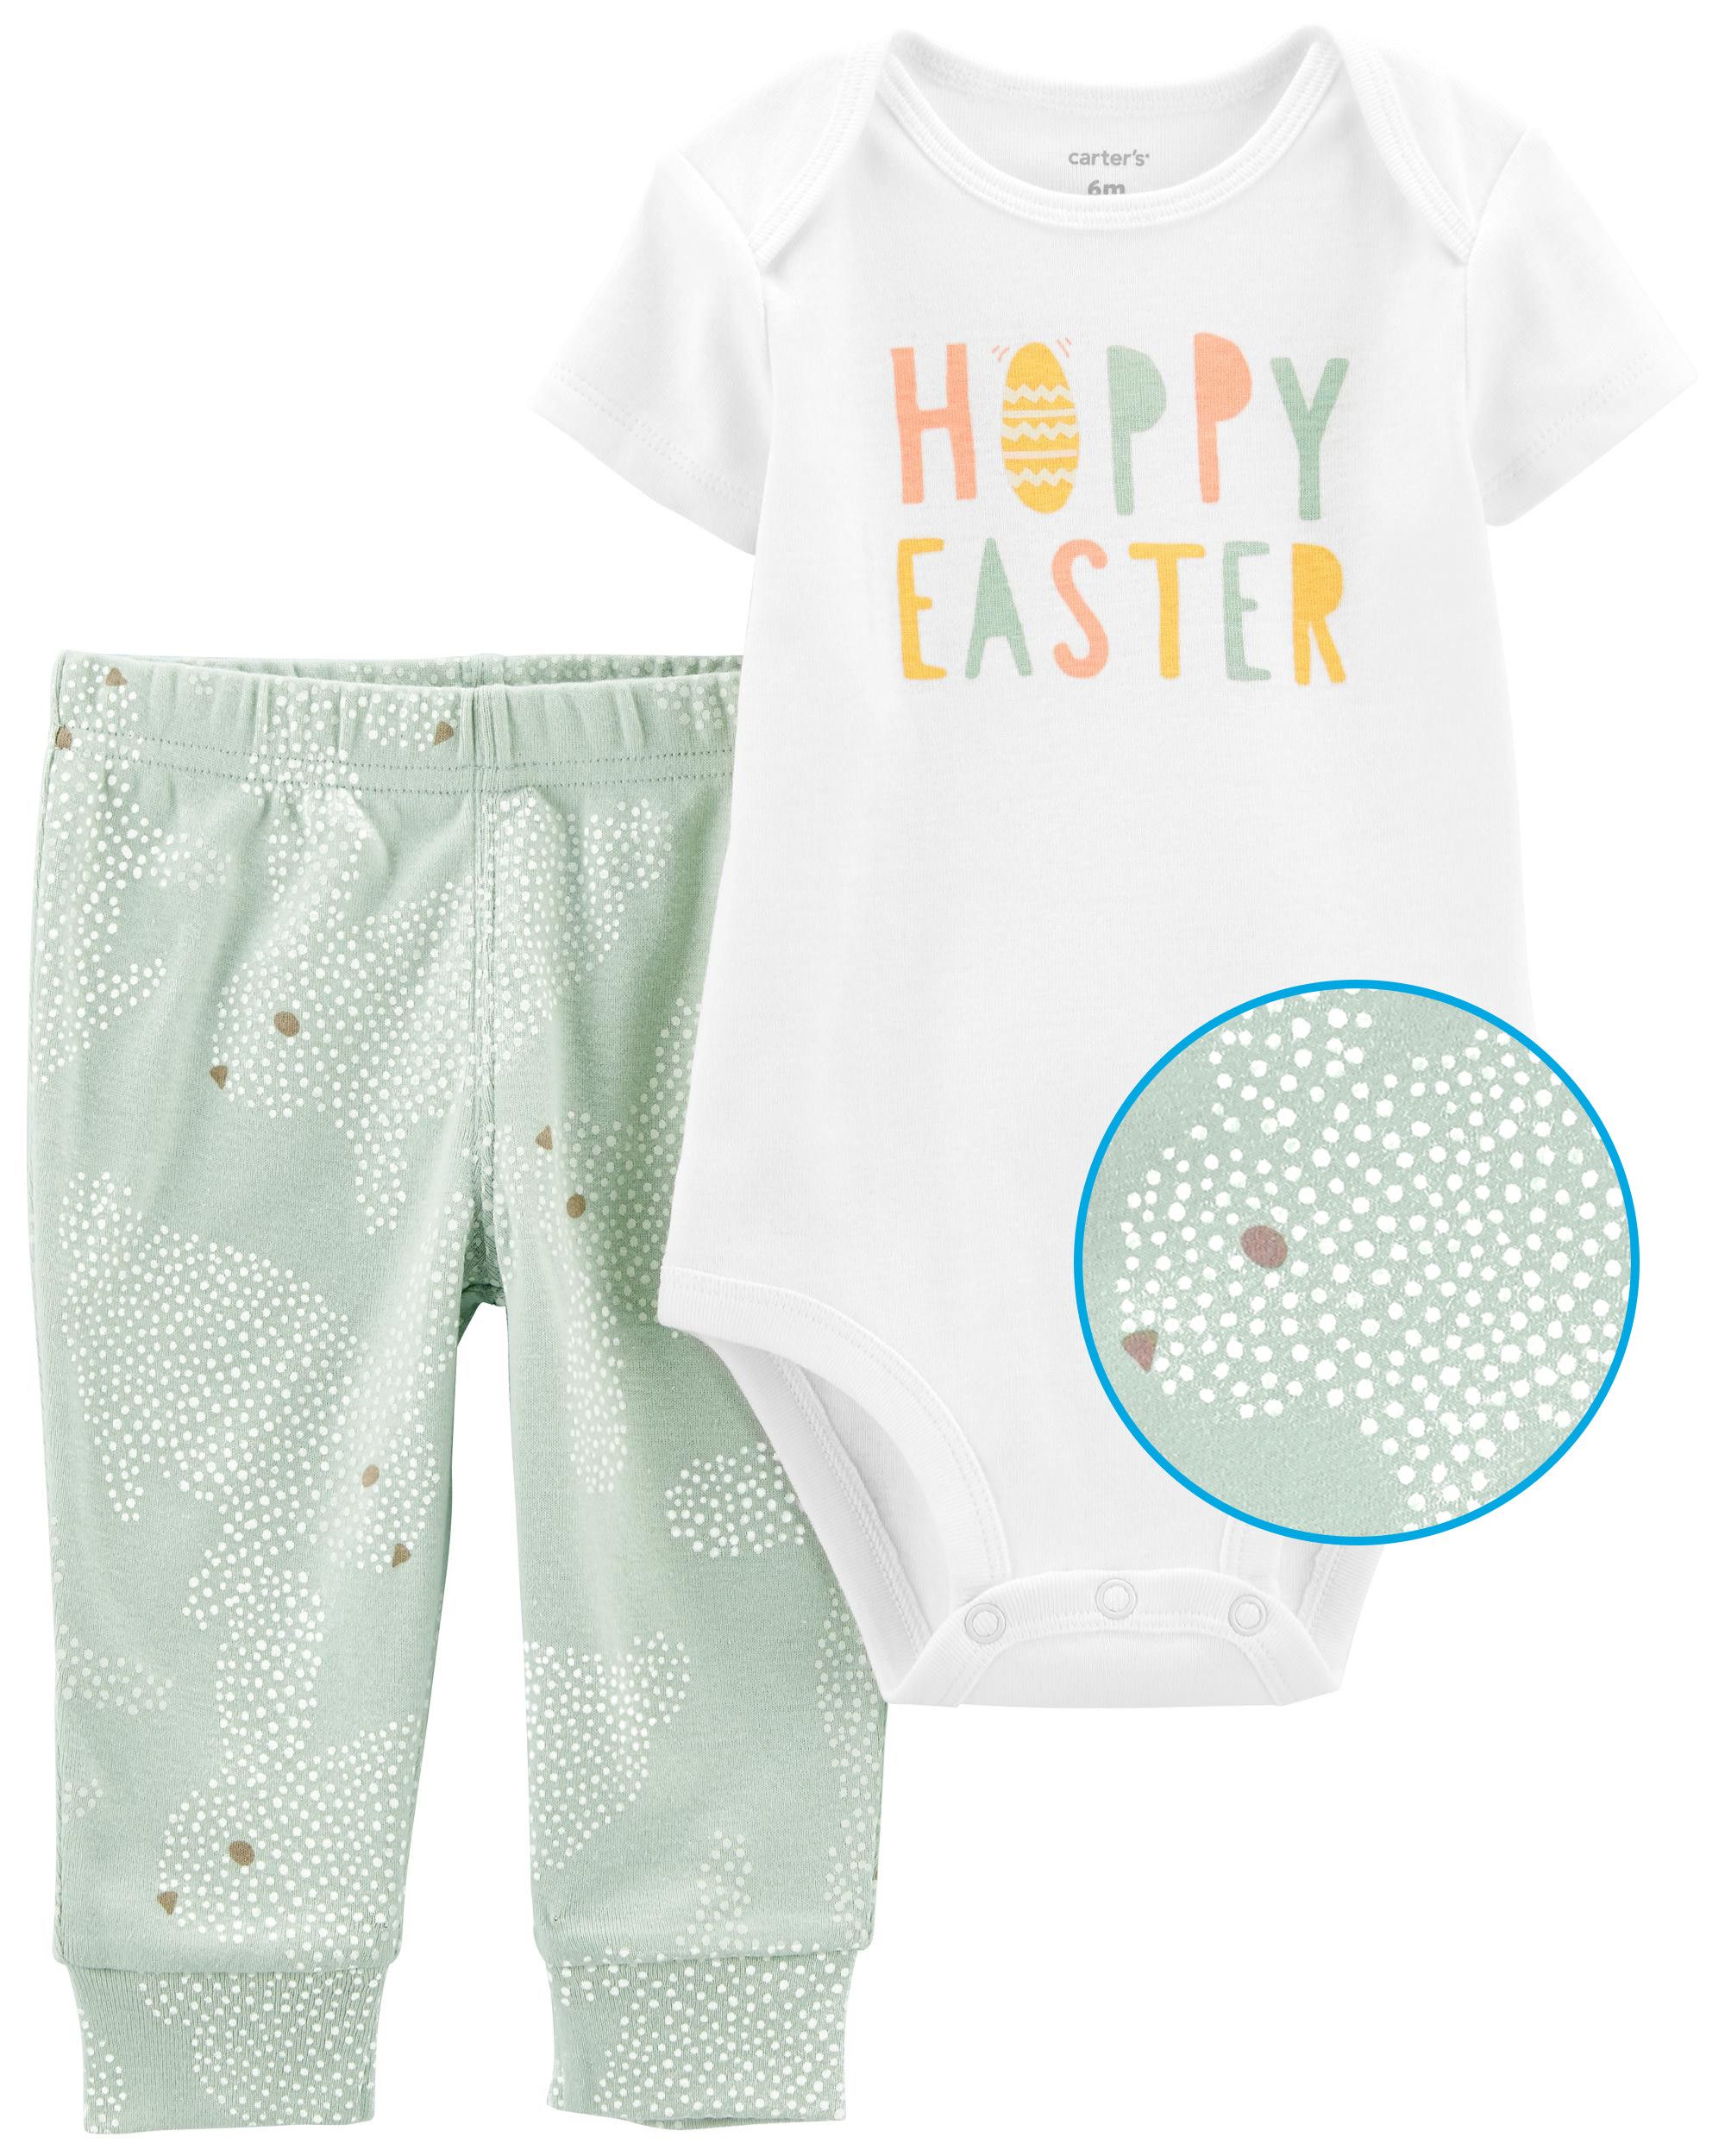 Easter Outfits, Easter Outfit, Baby Easter Outfits, Toddler Easter Outfits | Carter's